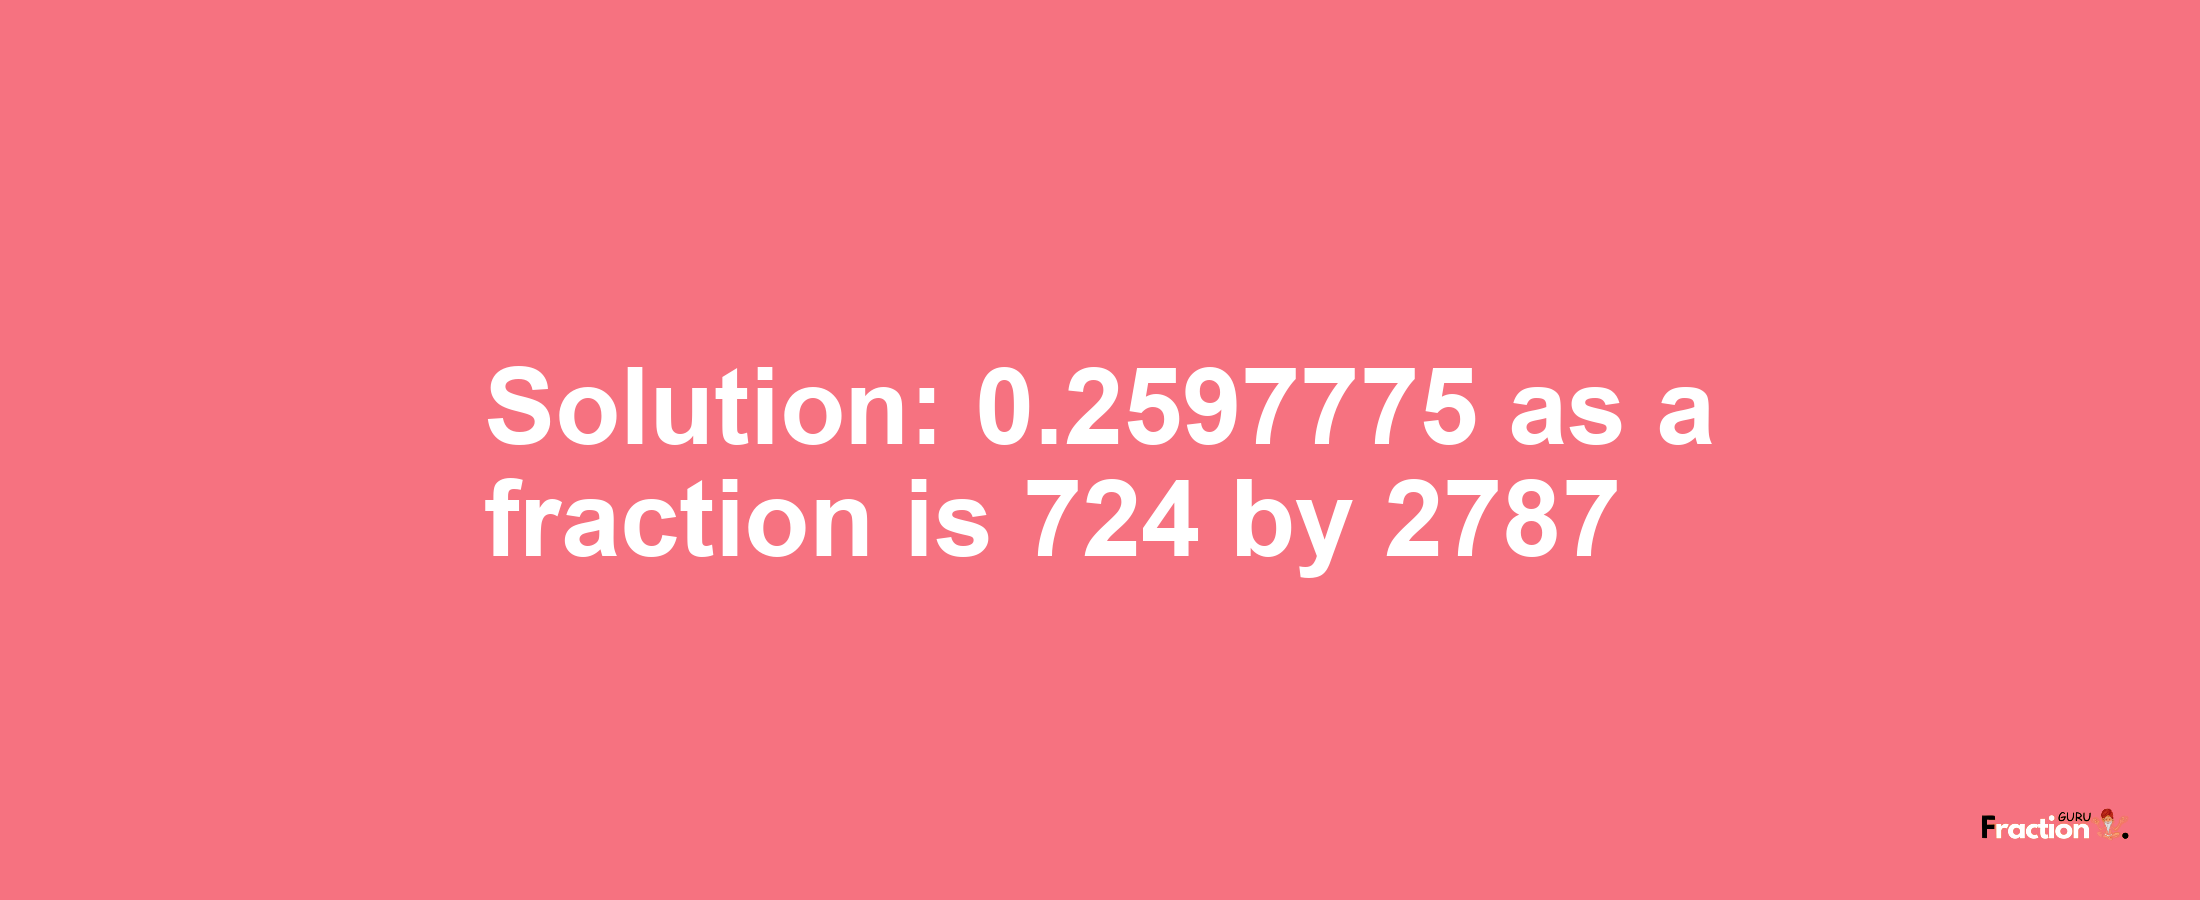 Solution:0.2597775 as a fraction is 724/2787